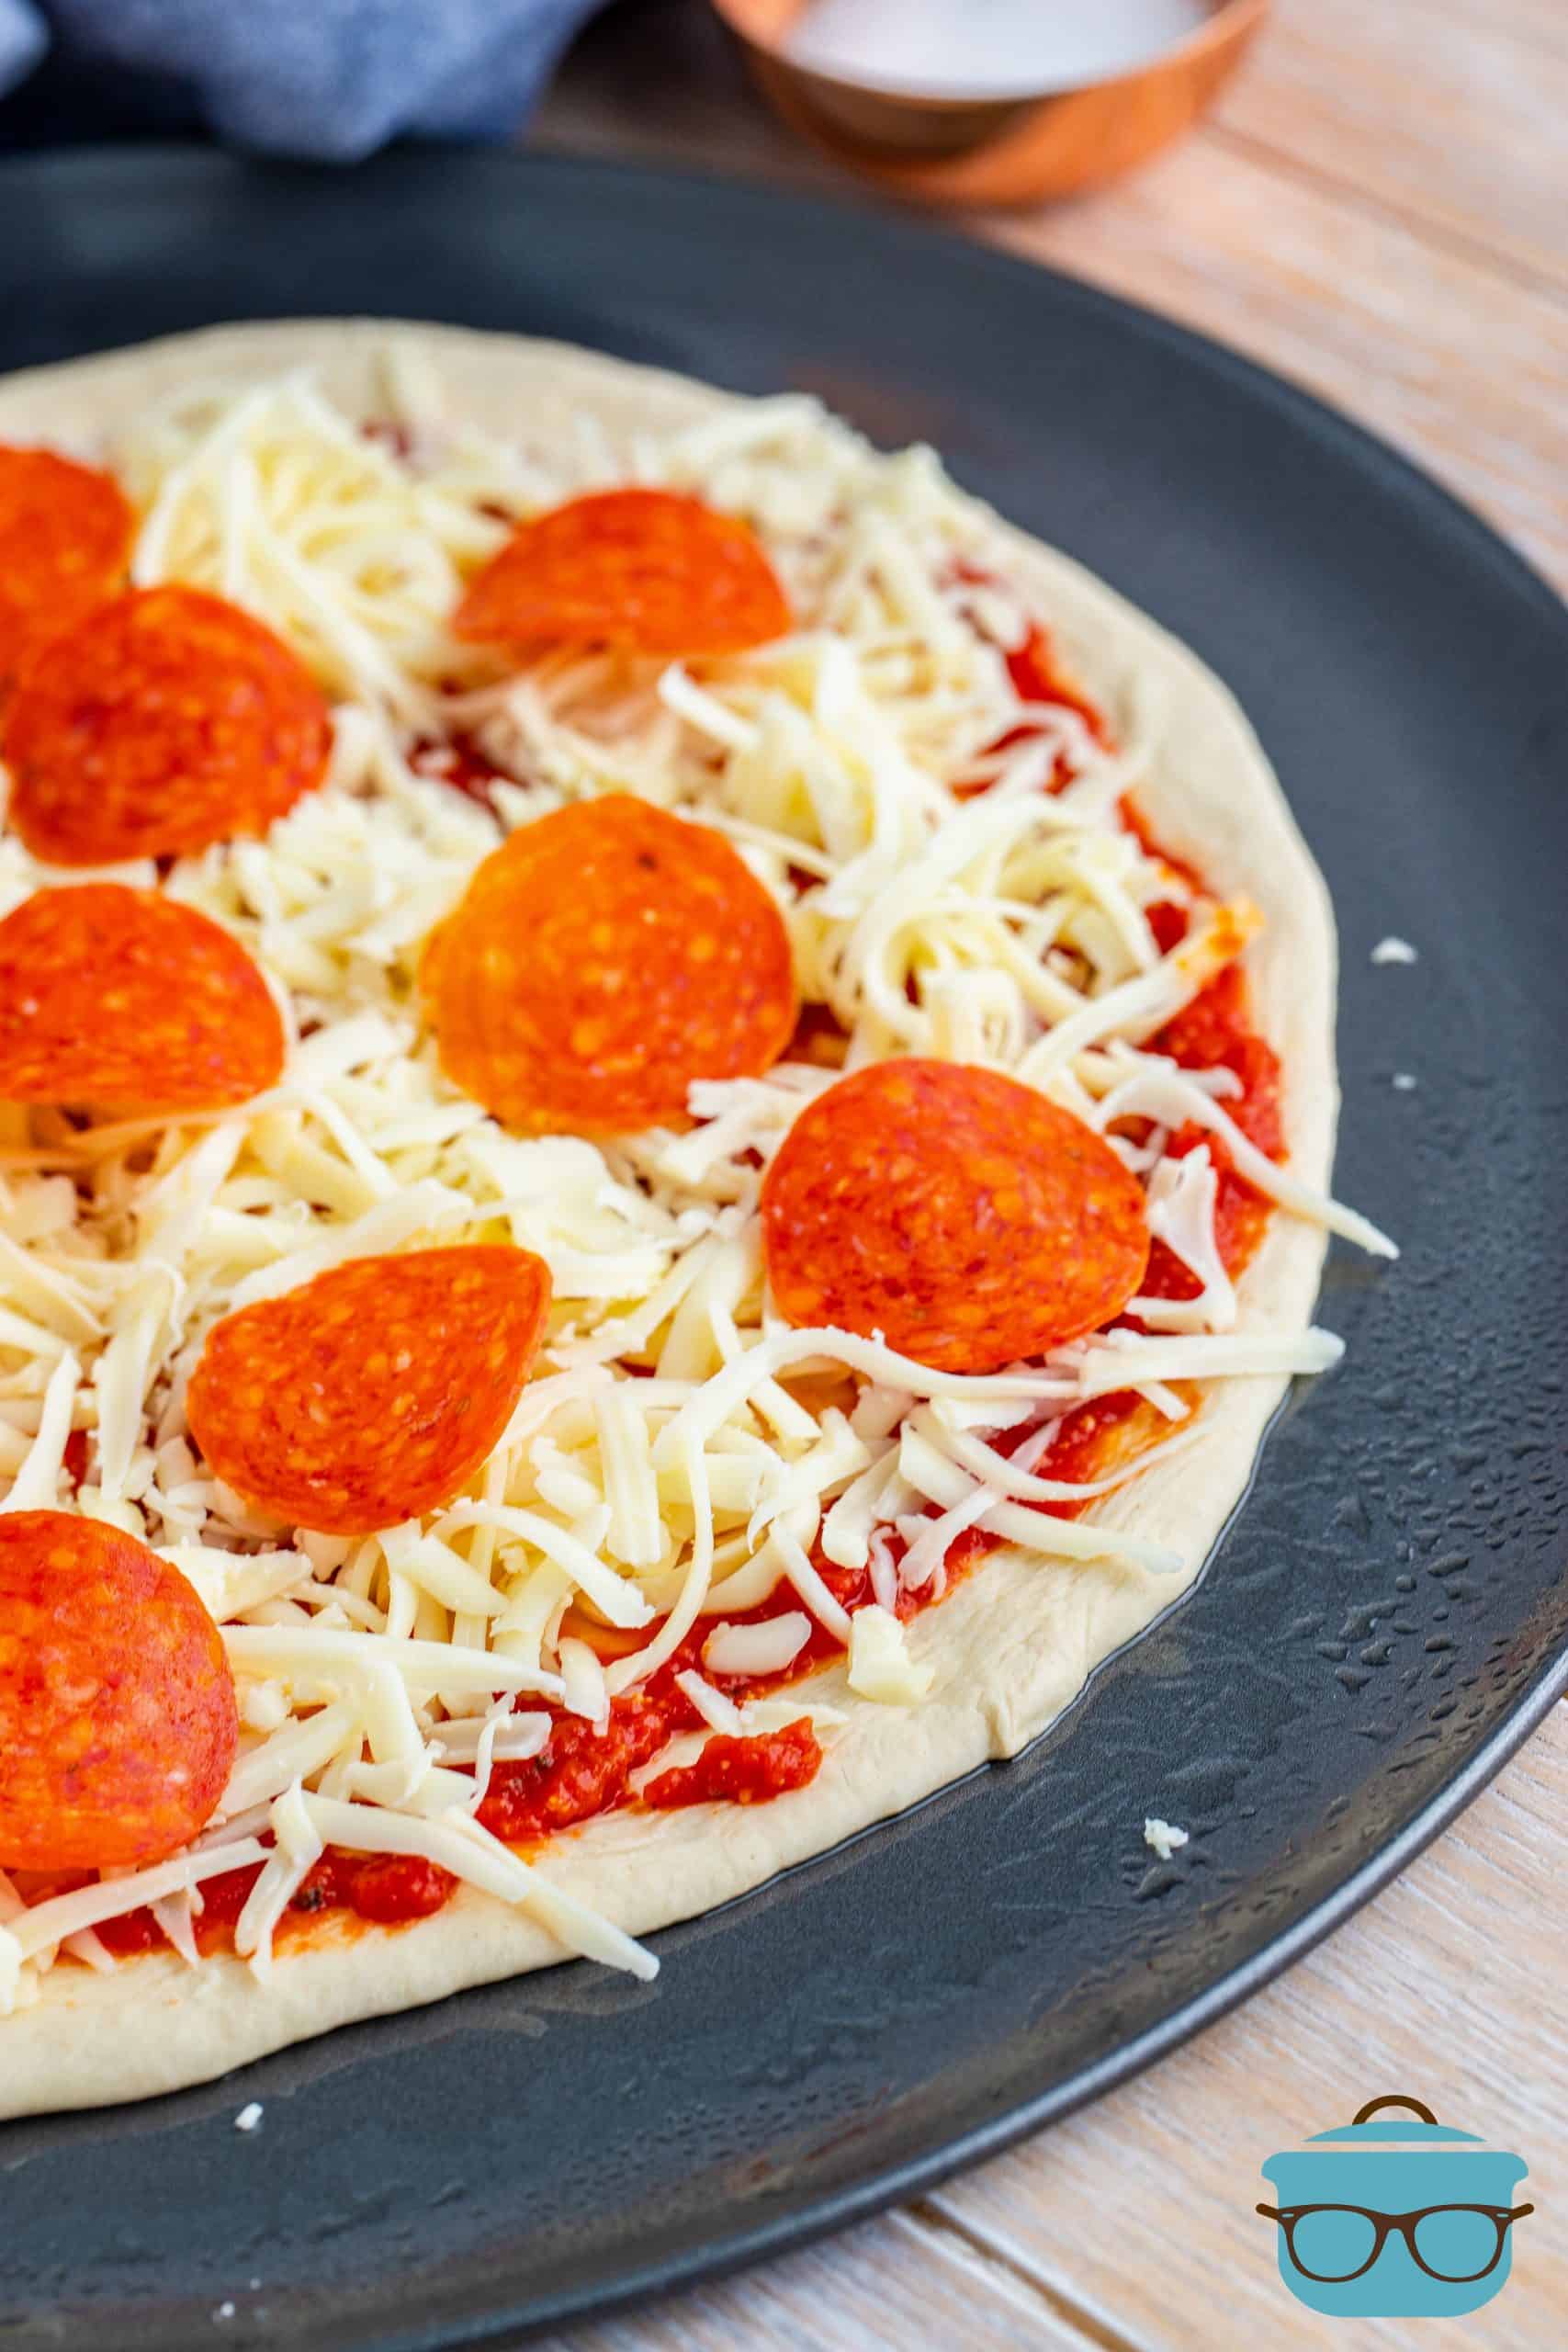 shredded cheese and pepperoni slices on pizza dough.